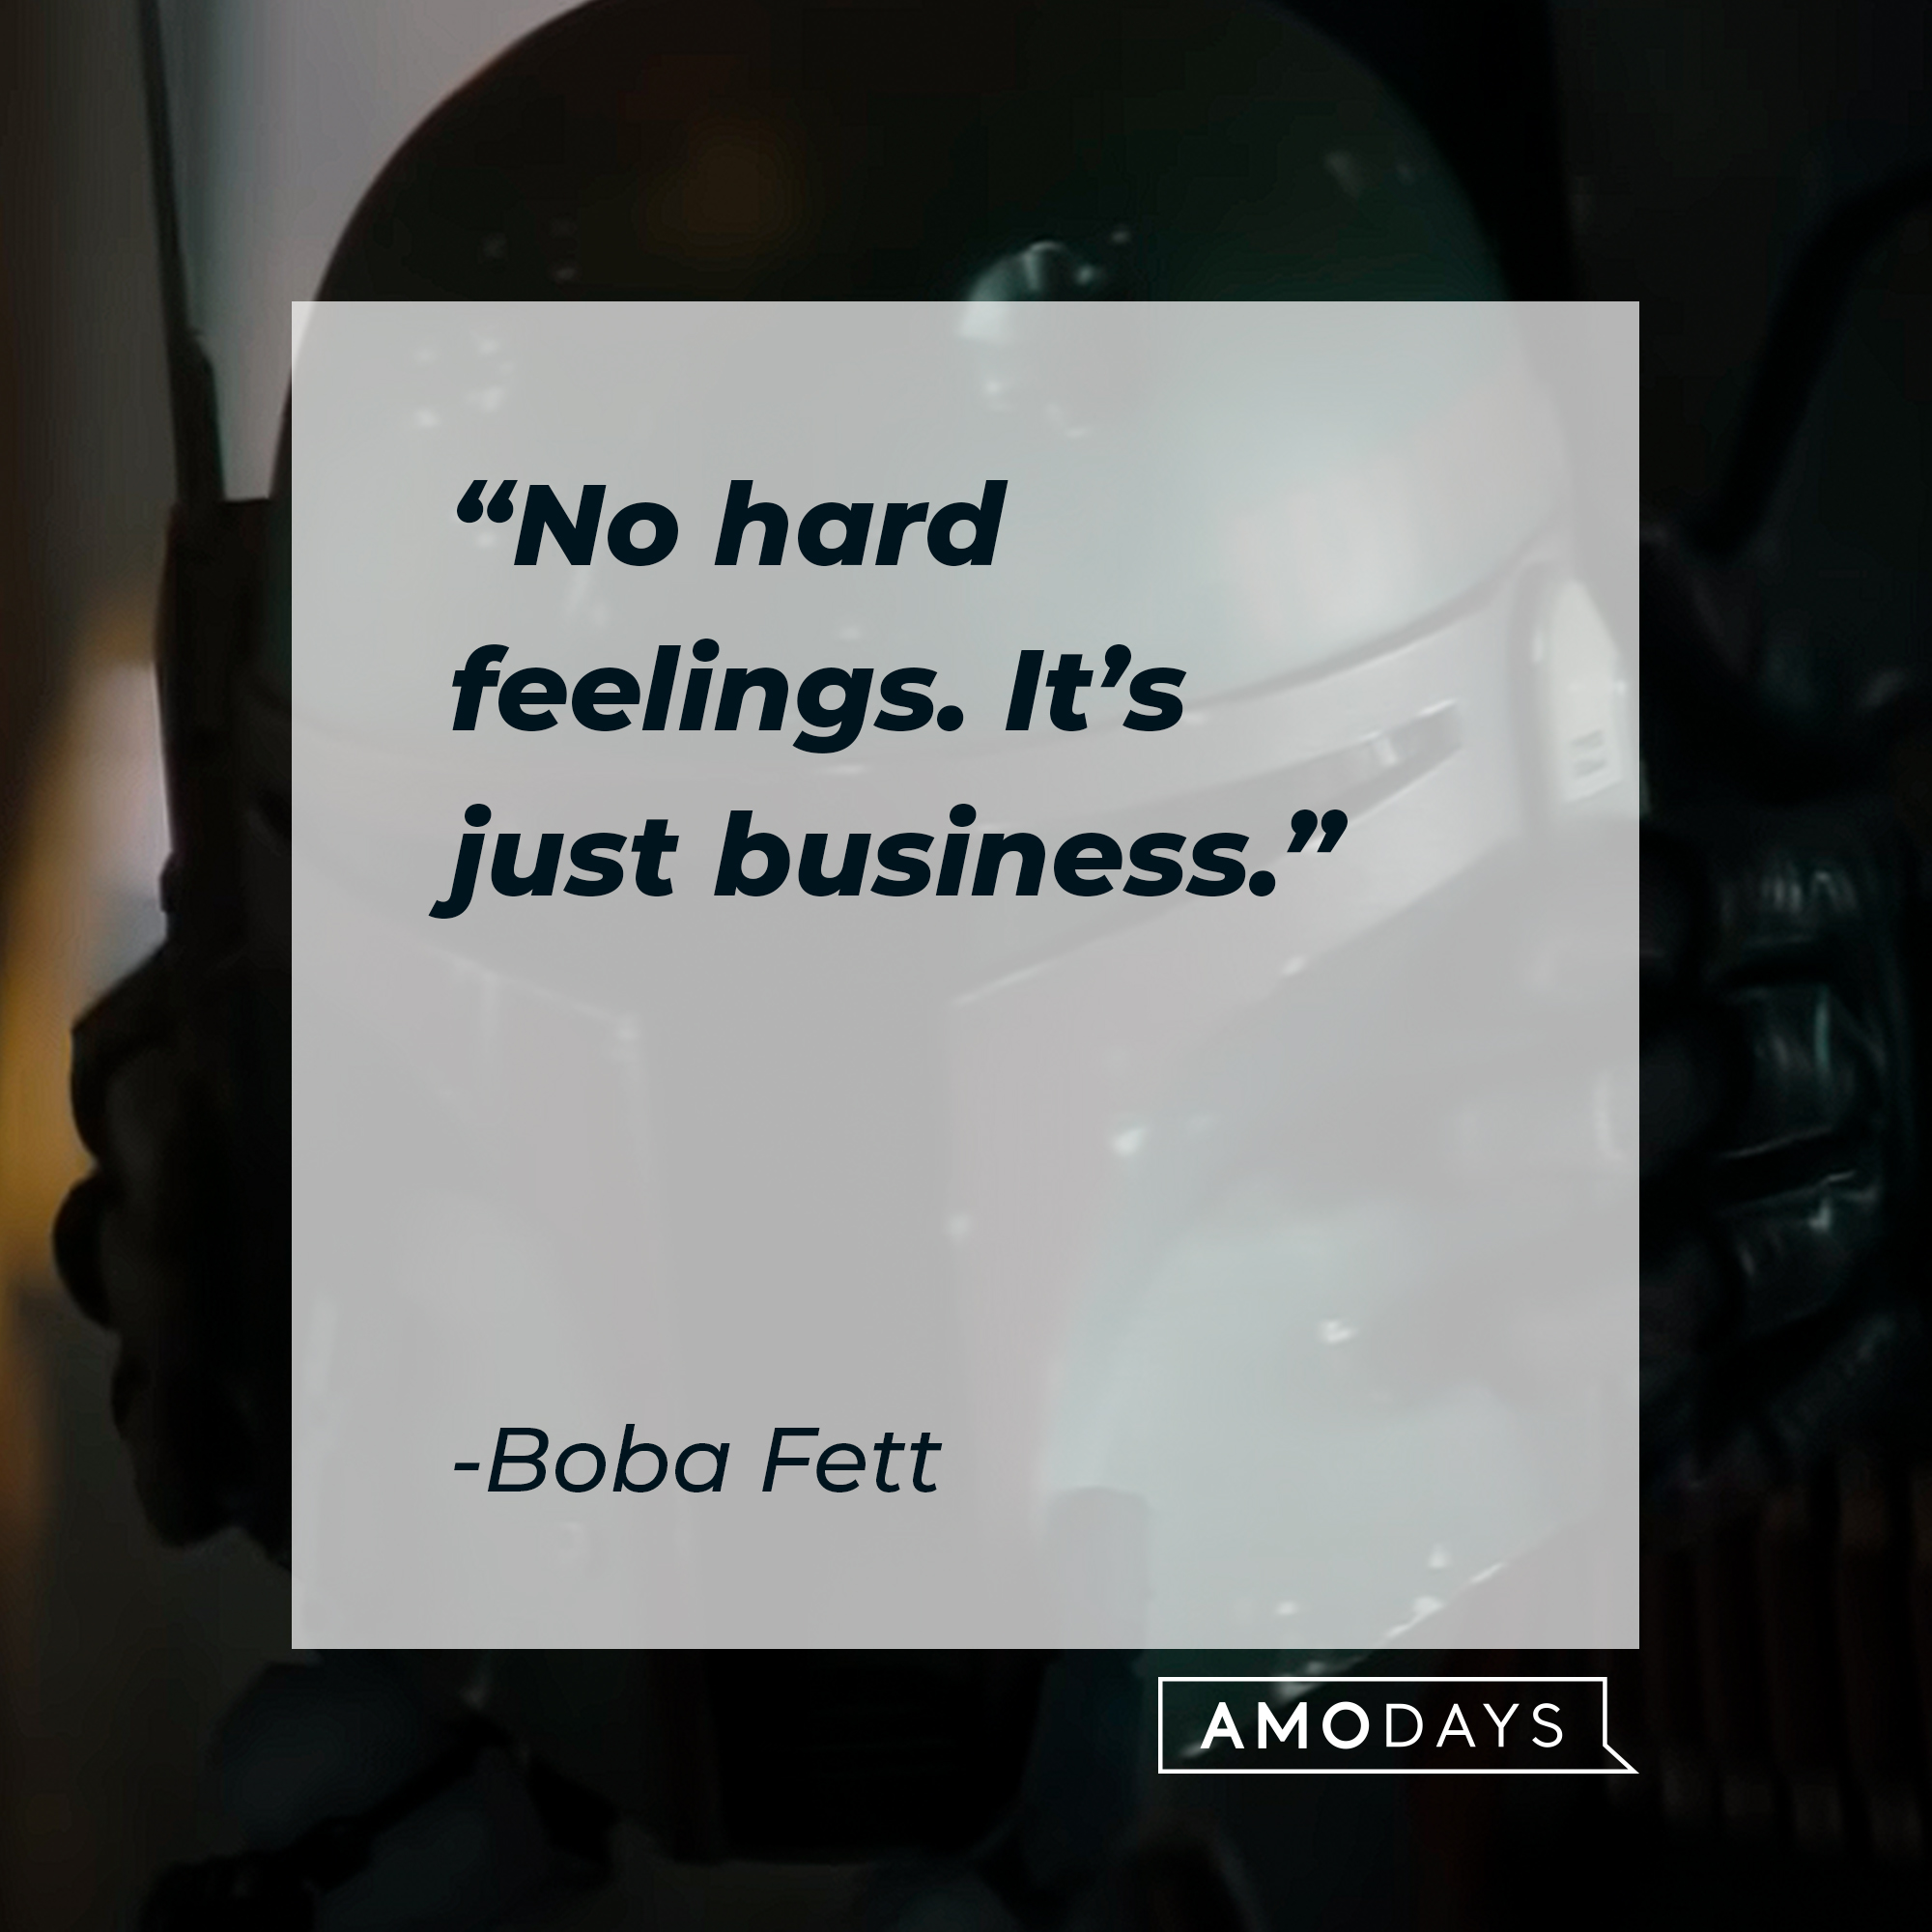 Boba Fett, with his quote:“No hard feelings. It’s just business.” │ Source: youtube.com/StarWars